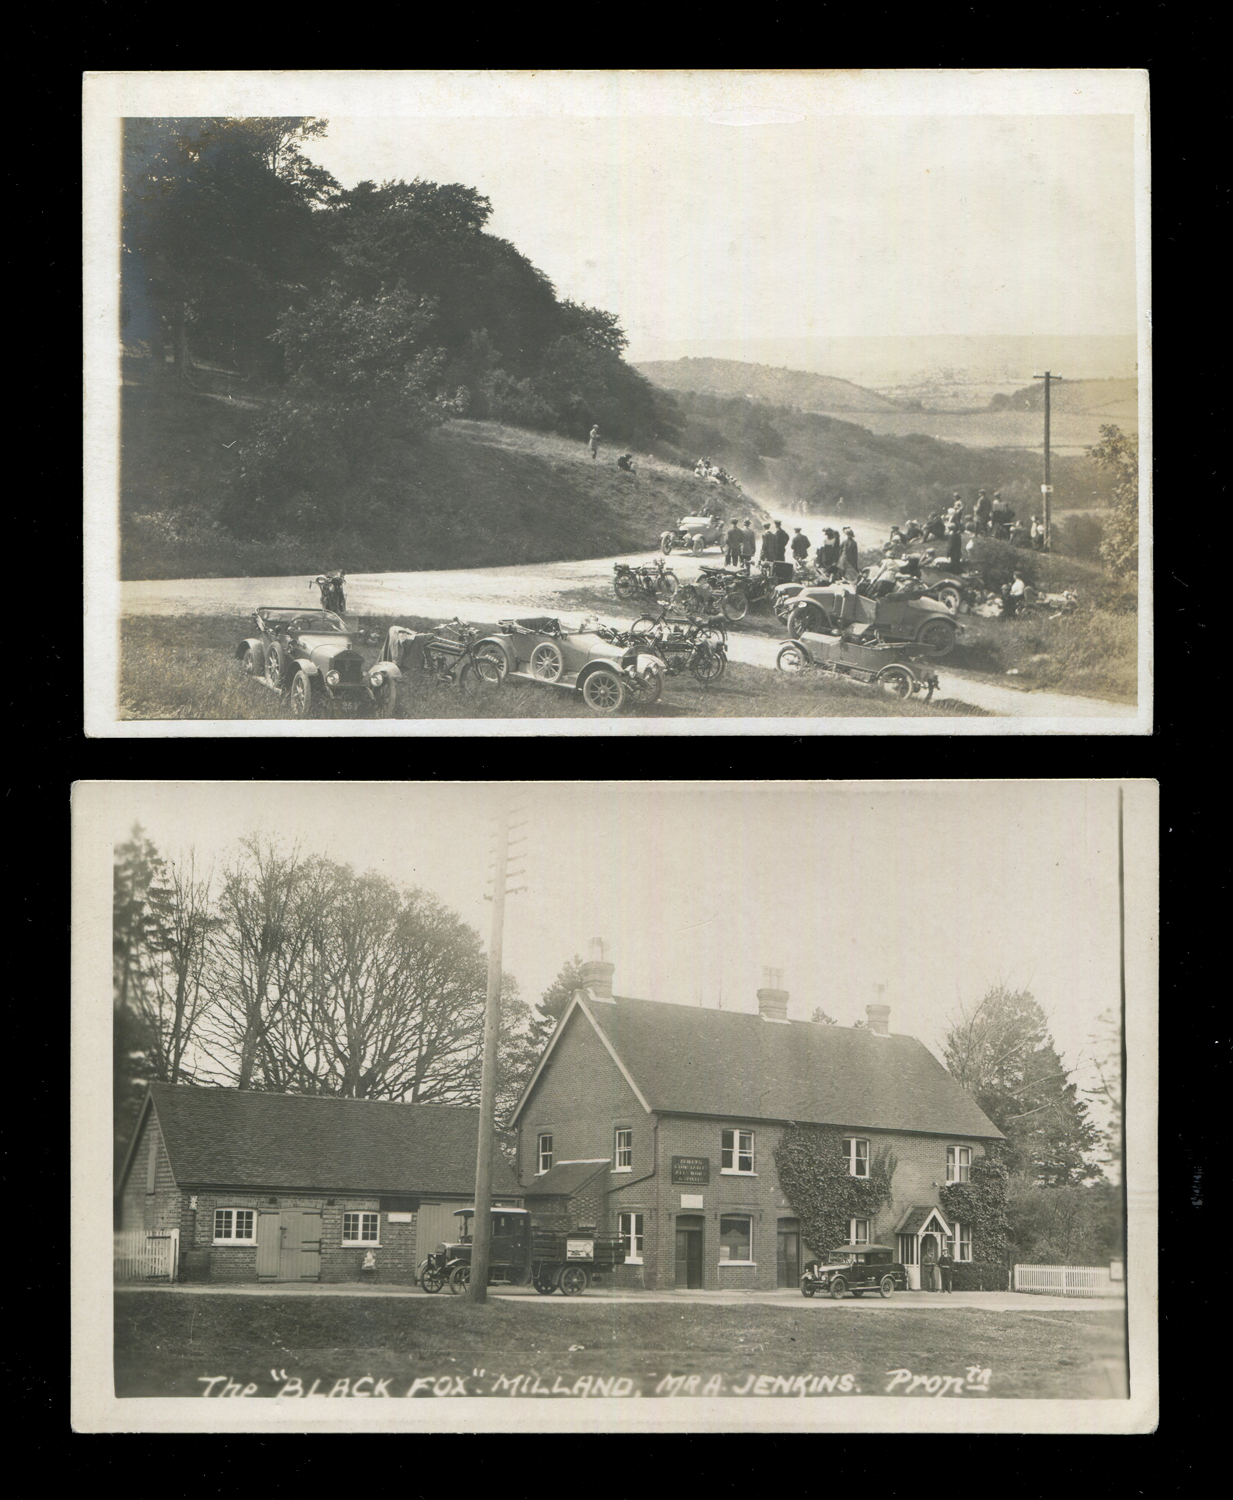 A collection of 27 postcards of Midhurst and Pulborough and their West Sussex environs, all